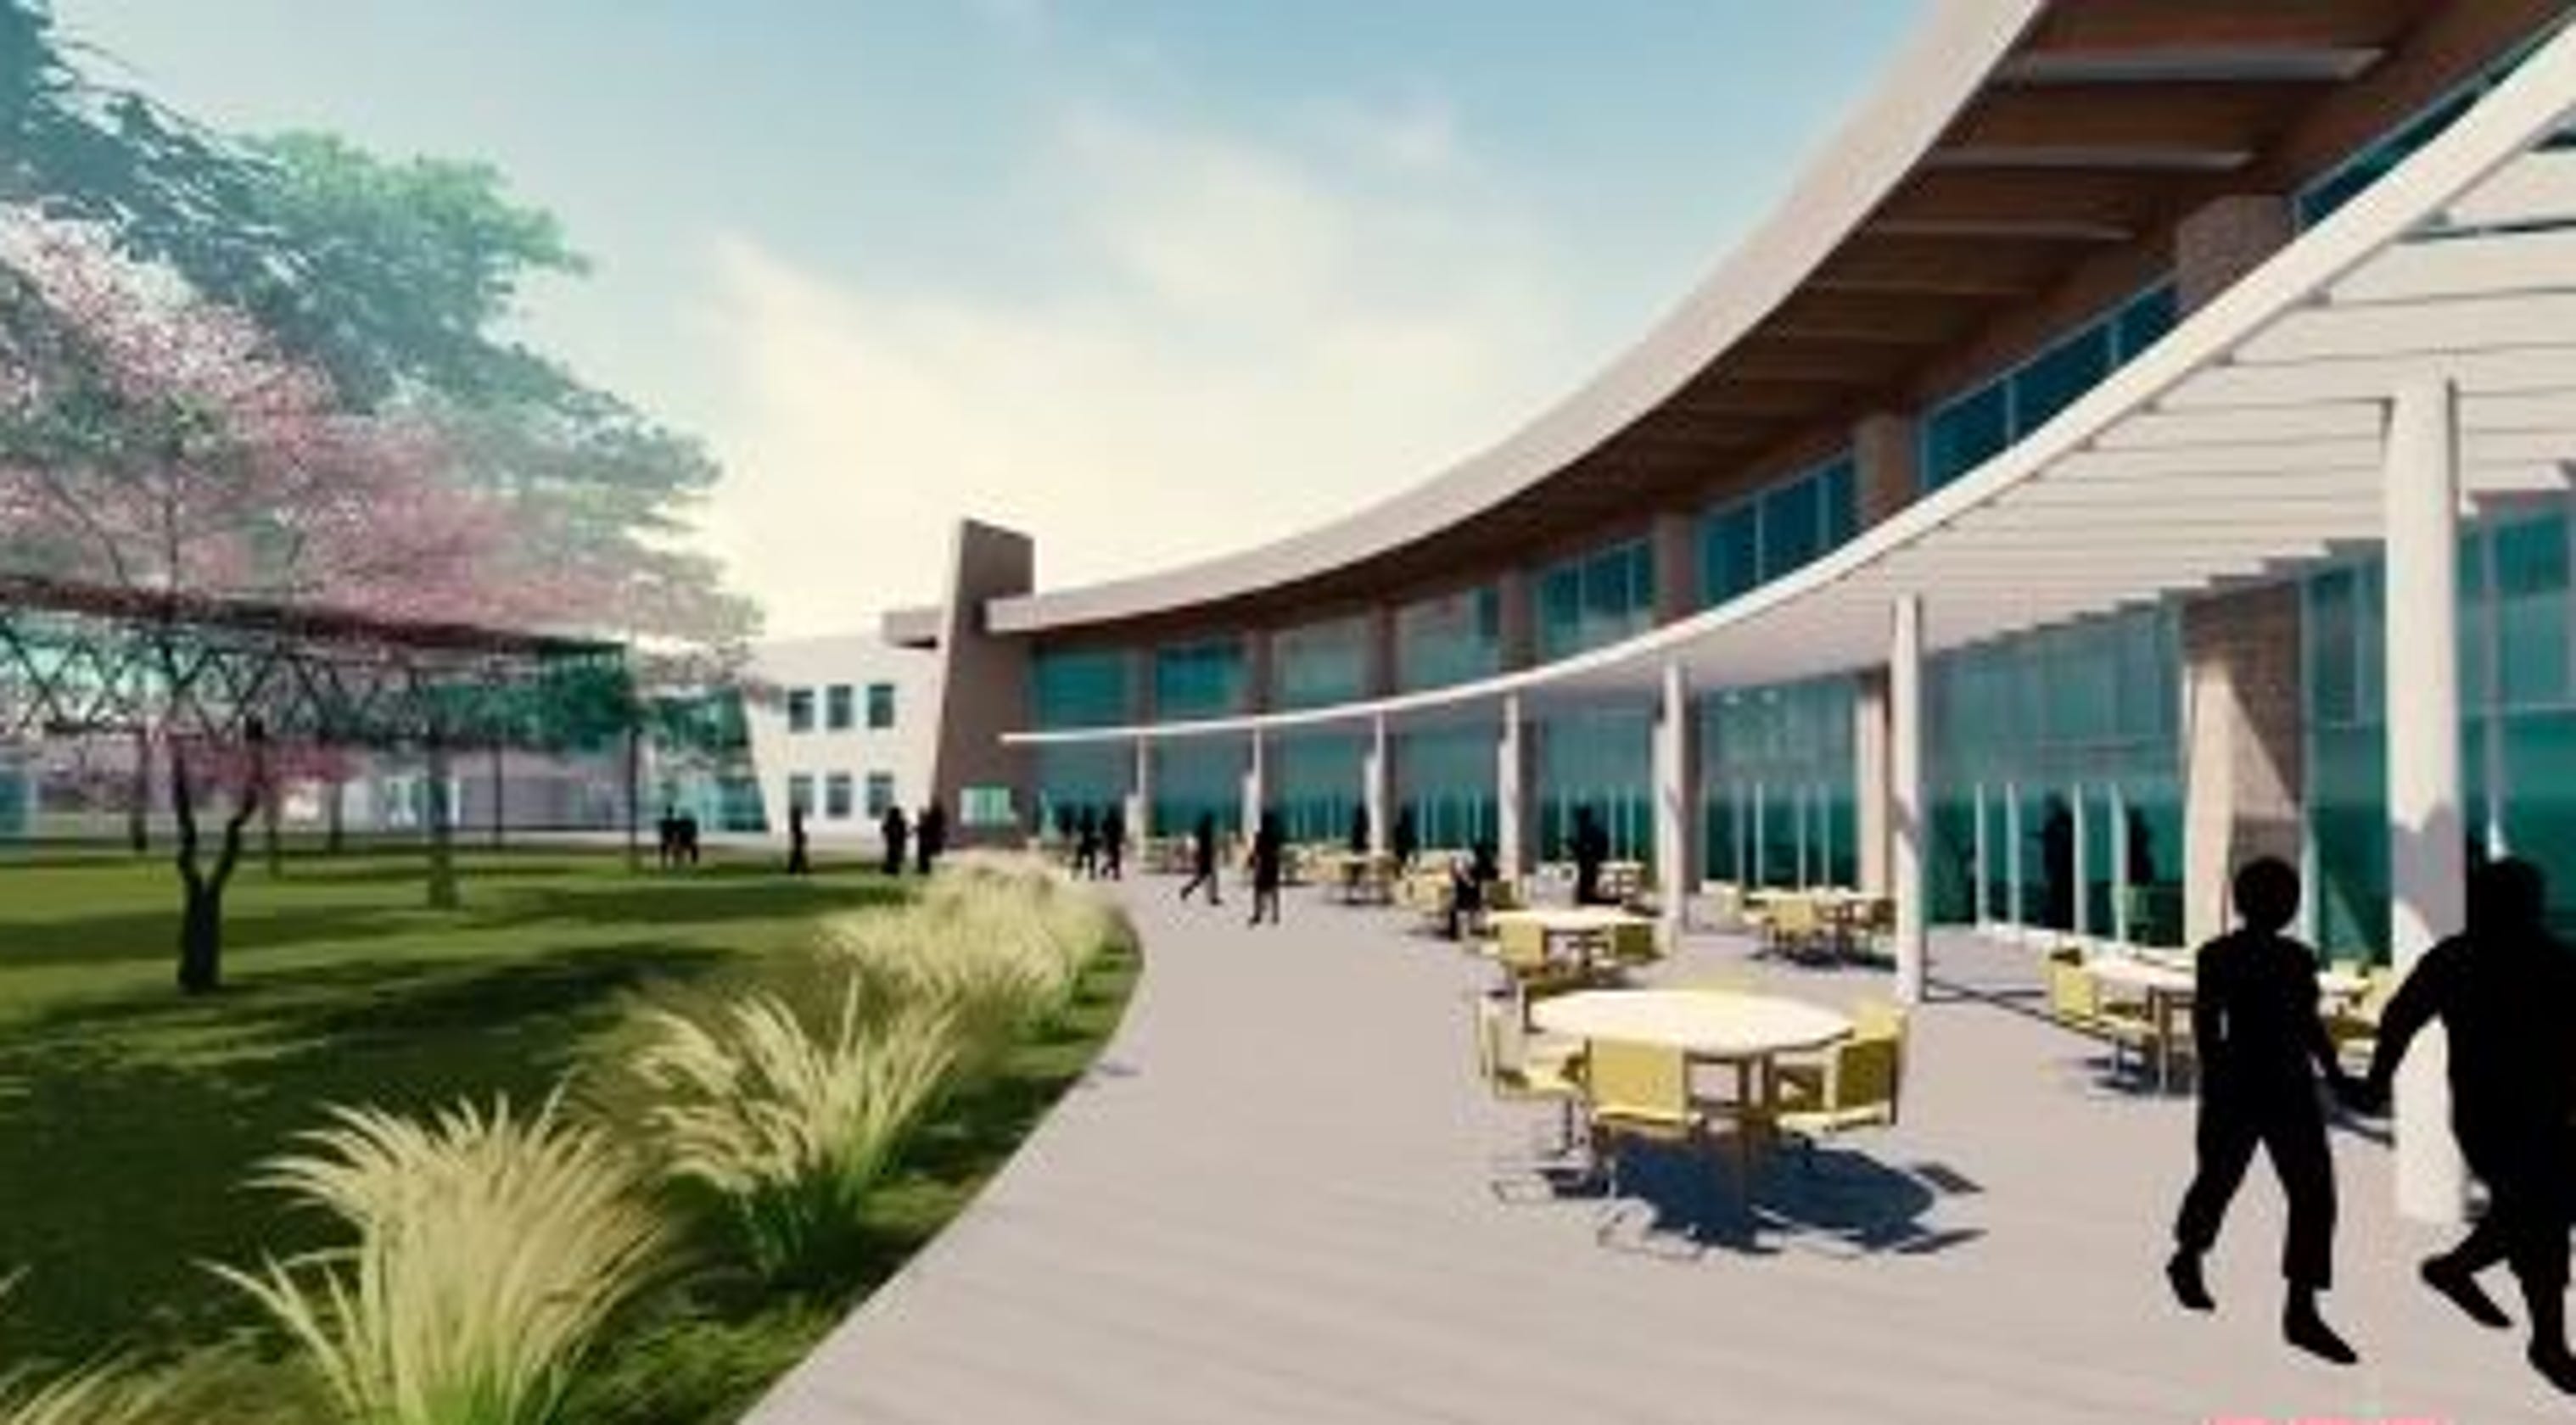 poudre-school-district-reveals-designs-for-new-middle-high-schools